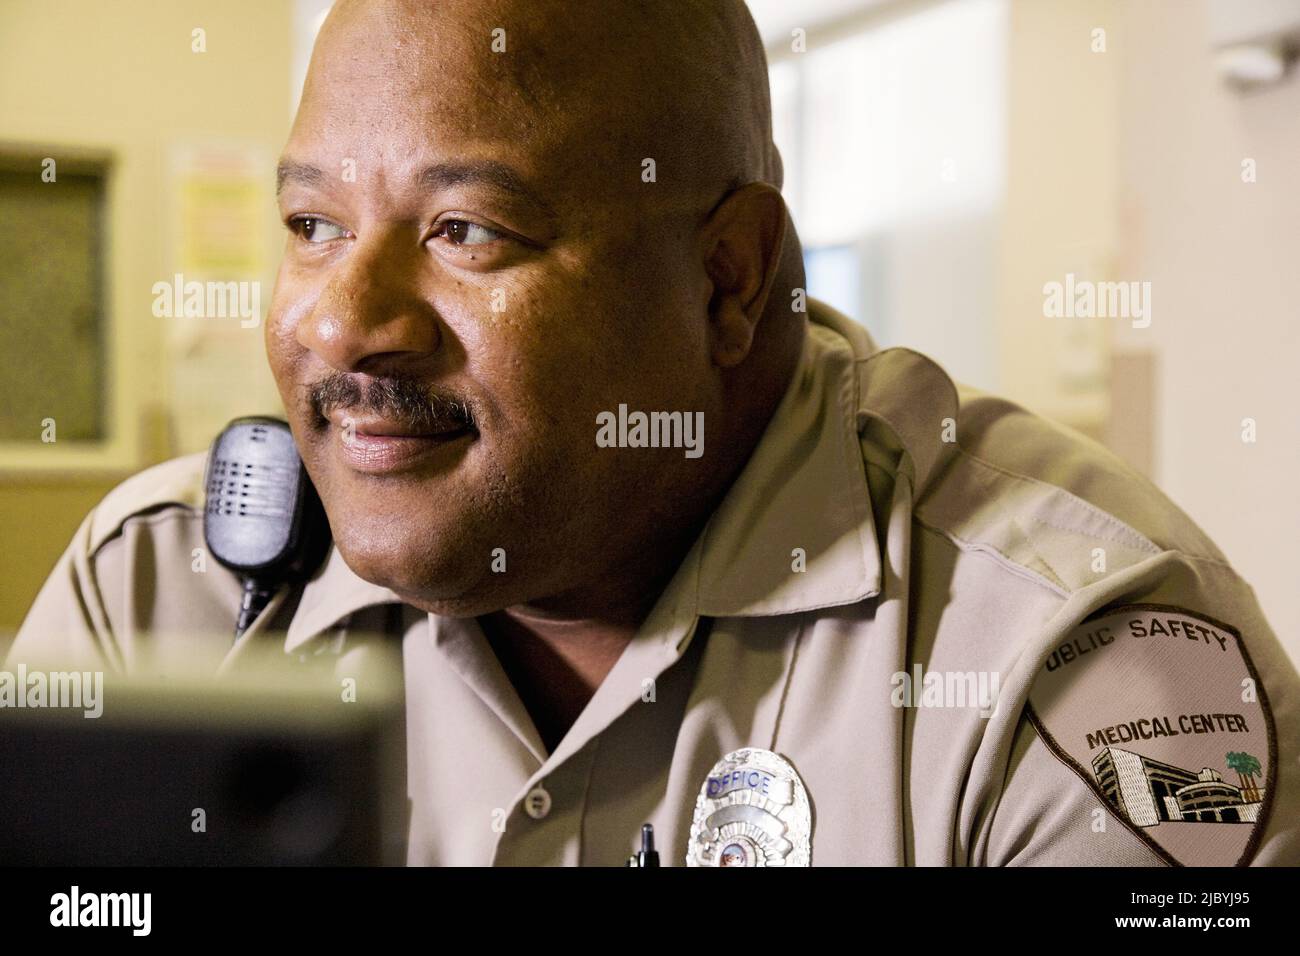 African security guard Stock Photo